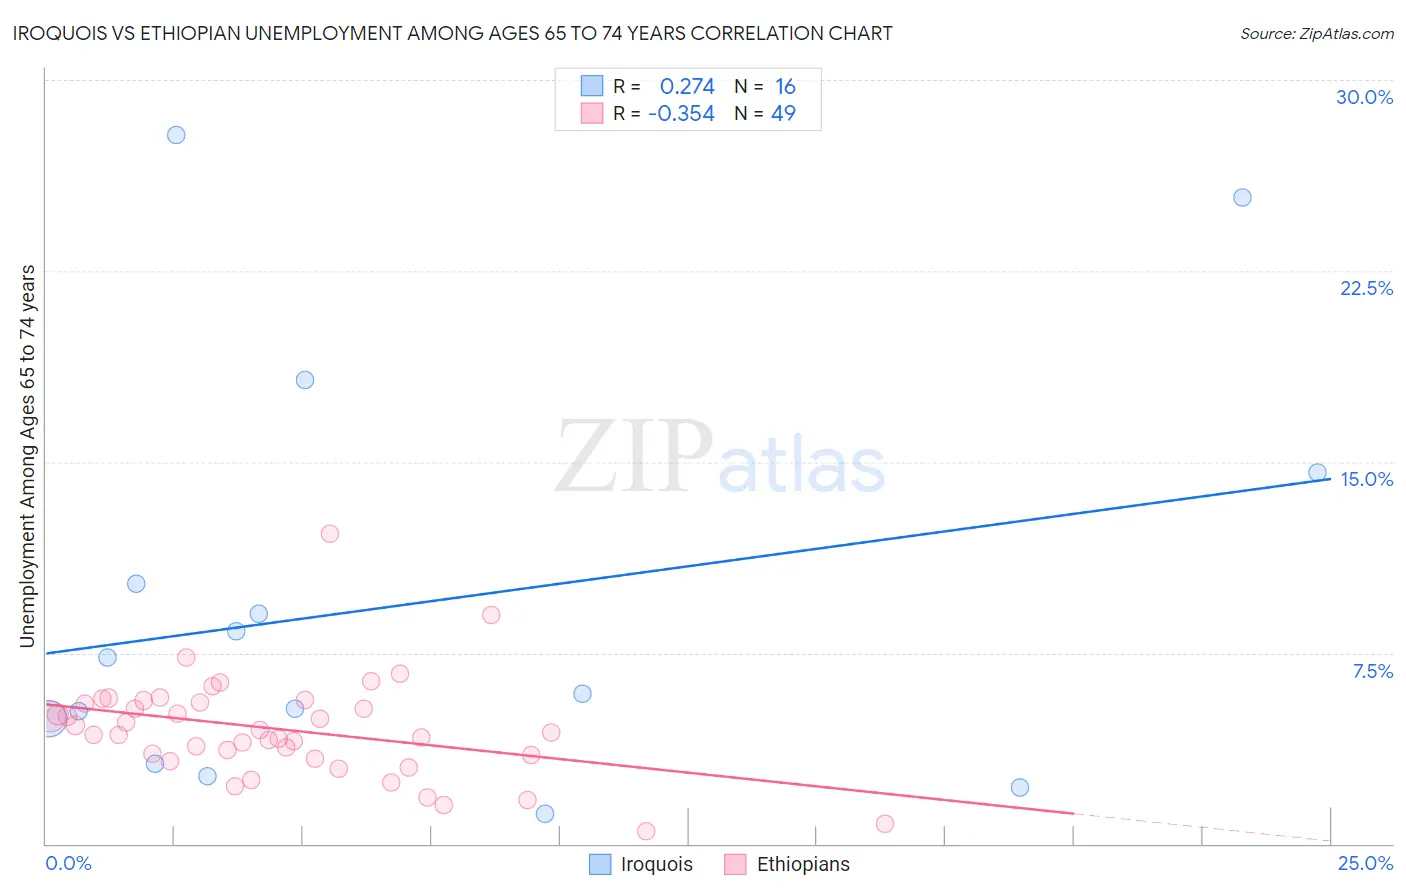 Iroquois vs Ethiopian Unemployment Among Ages 65 to 74 years